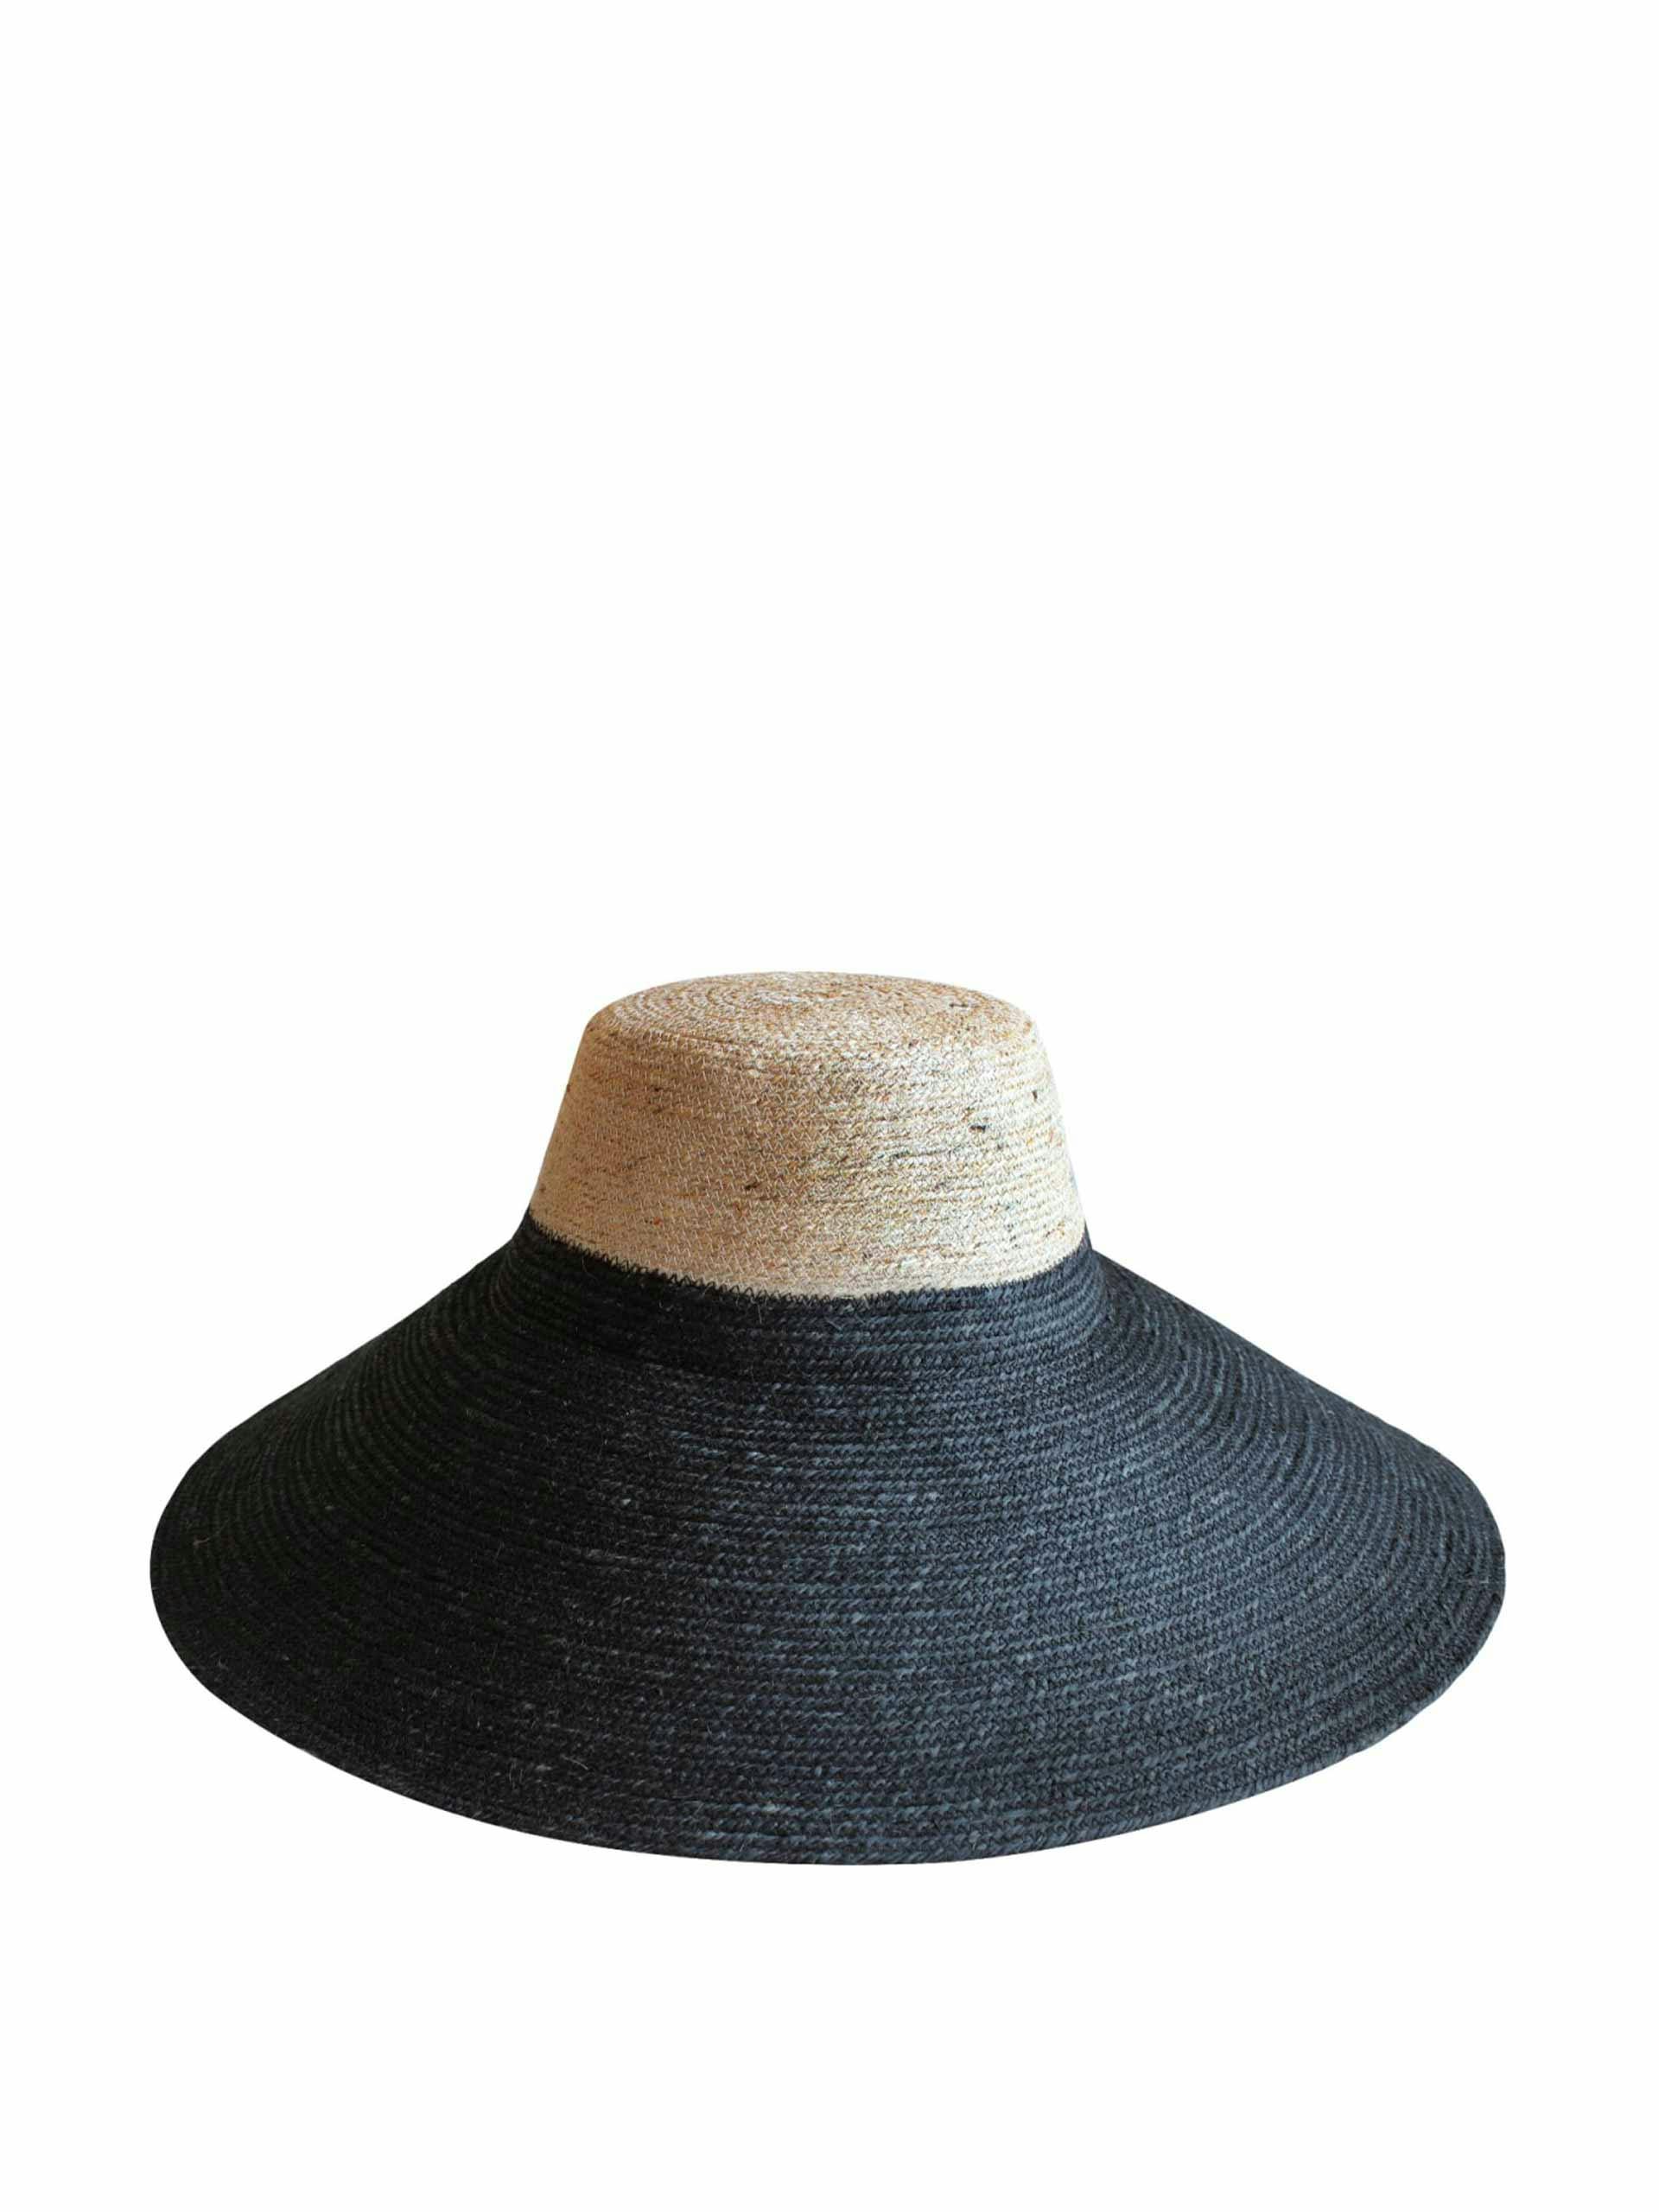 Black and natural straw hat